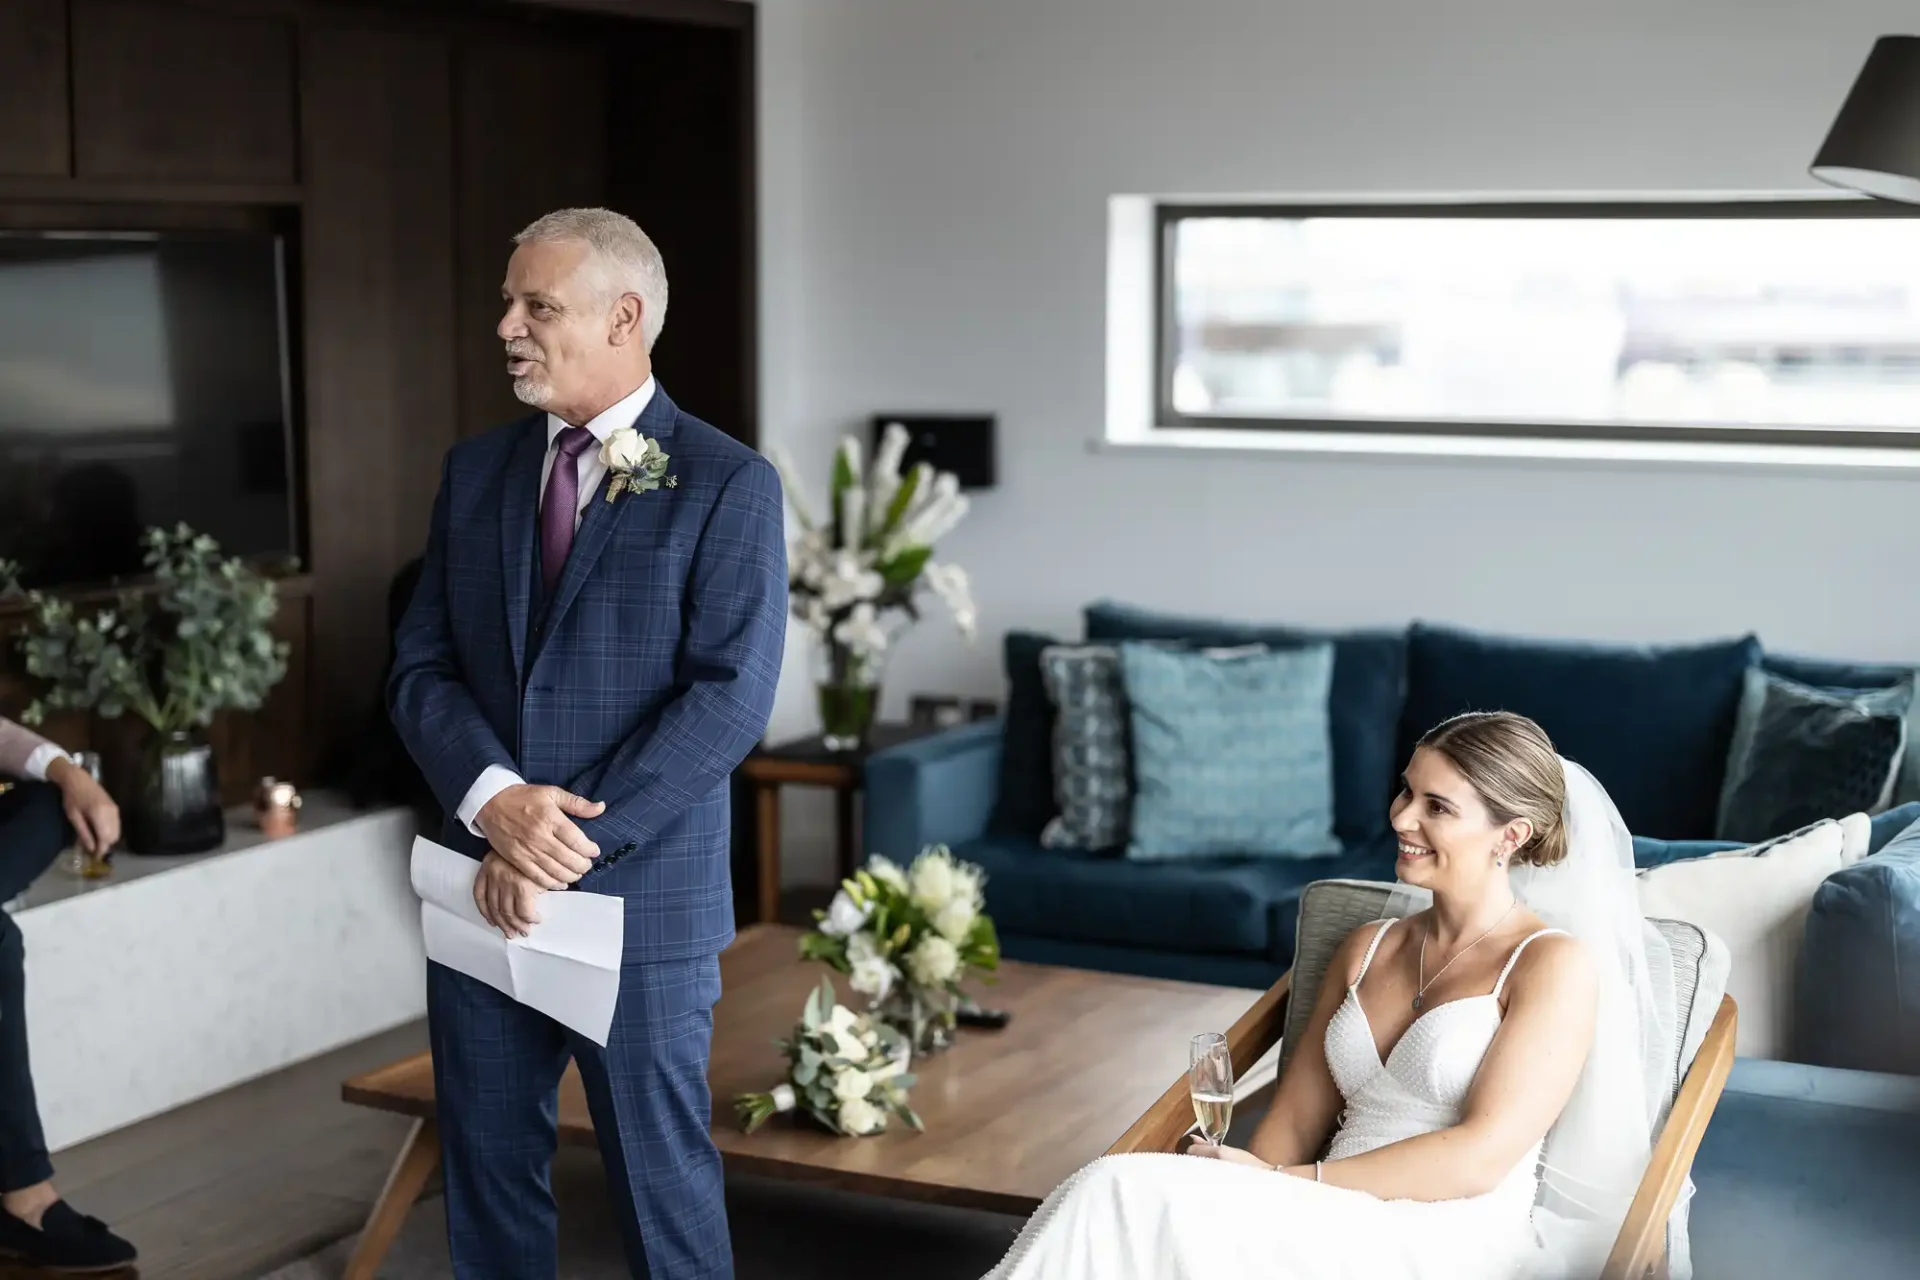 Father of the bride giving a speech with the bride seated and smiling in a modern living room setting.